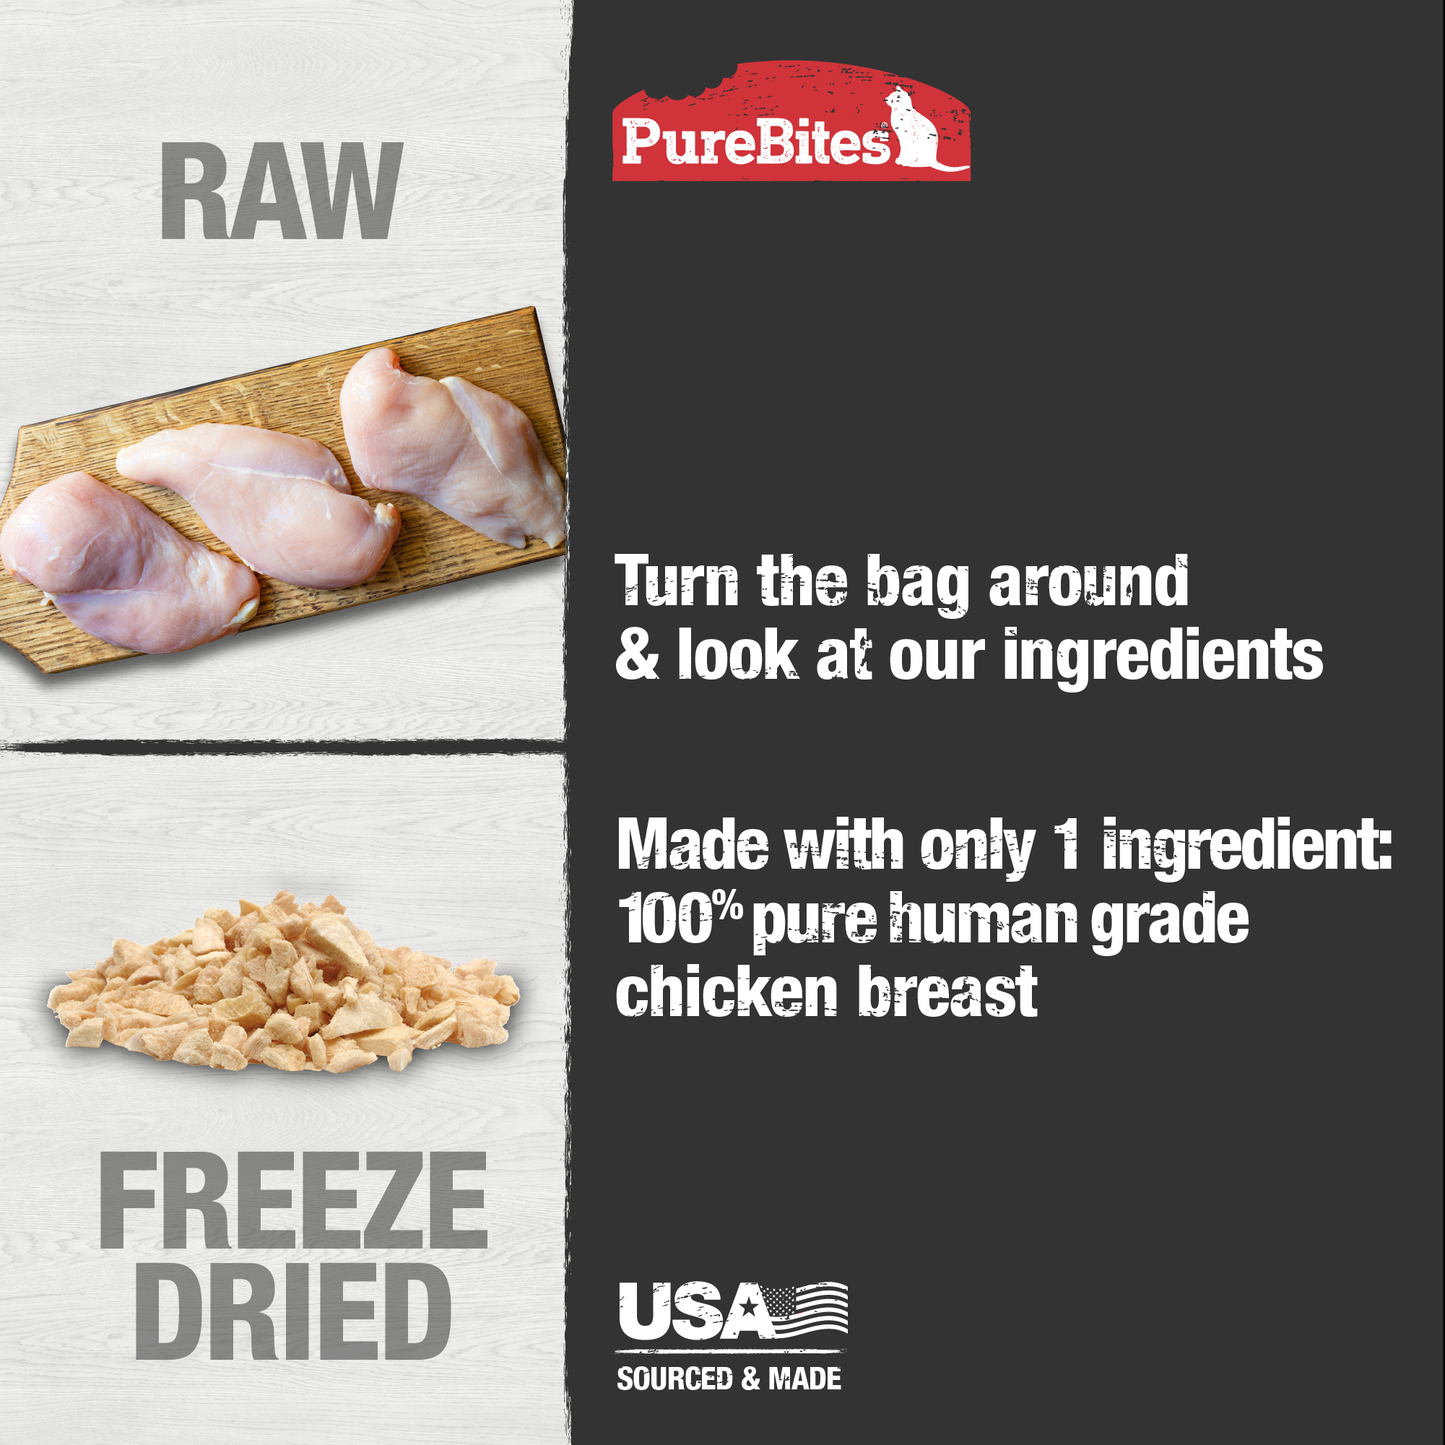 Made with only 1 Ingredient you can read, pronounce, and trust: USA sourced human grade chicken breast.